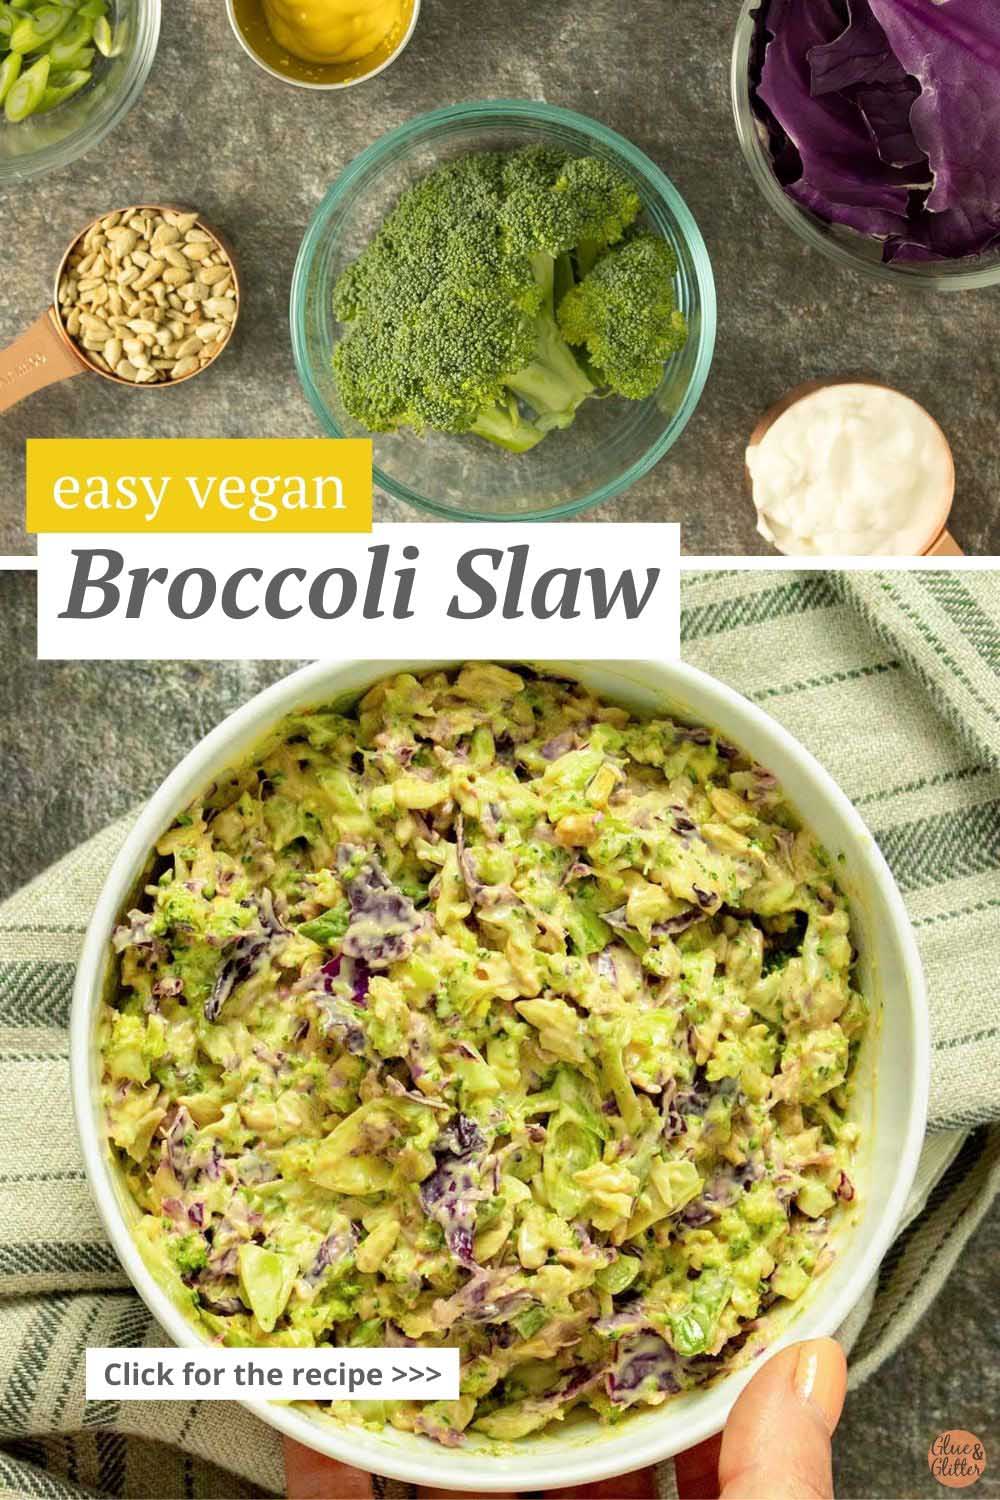 image collage showing slaw ingredients and finished broccoli slaw in a white bowl